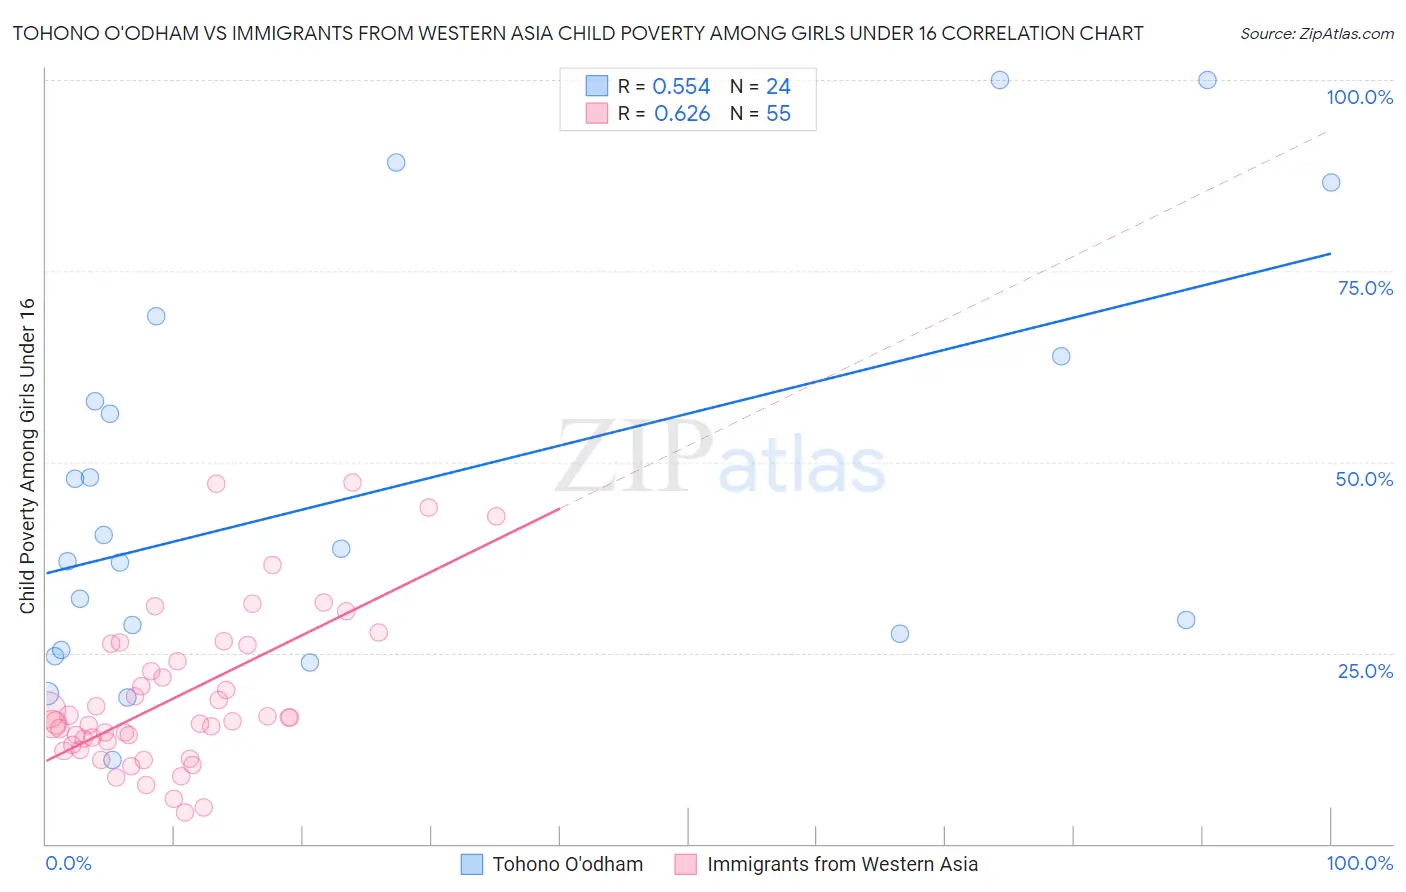 Tohono O'odham vs Immigrants from Western Asia Child Poverty Among Girls Under 16